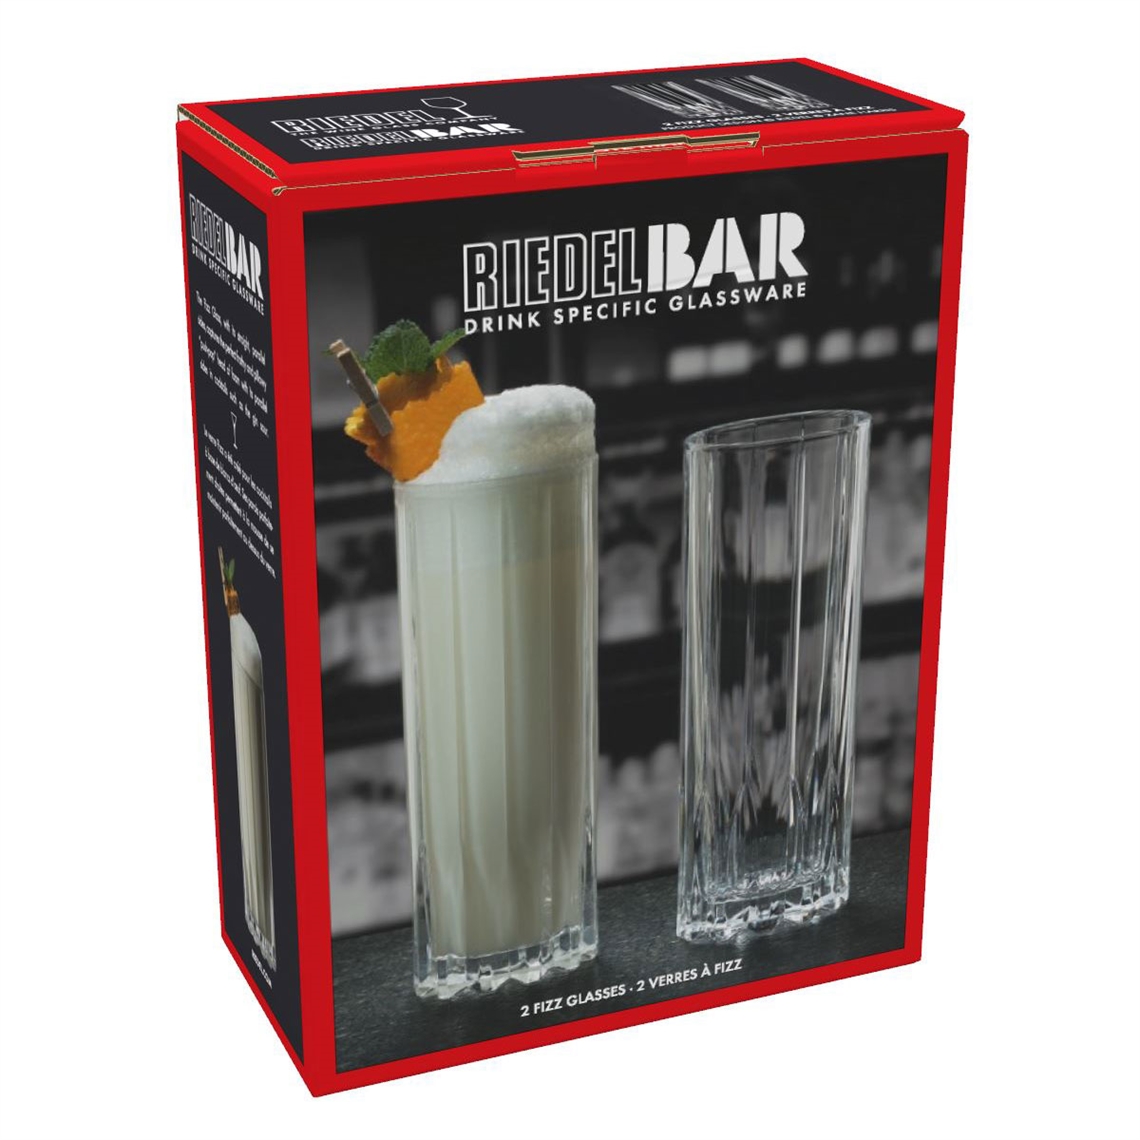 Riedel Bar Drink Specific Fizz Highball Tumbler - Set of 2 - 6417/03